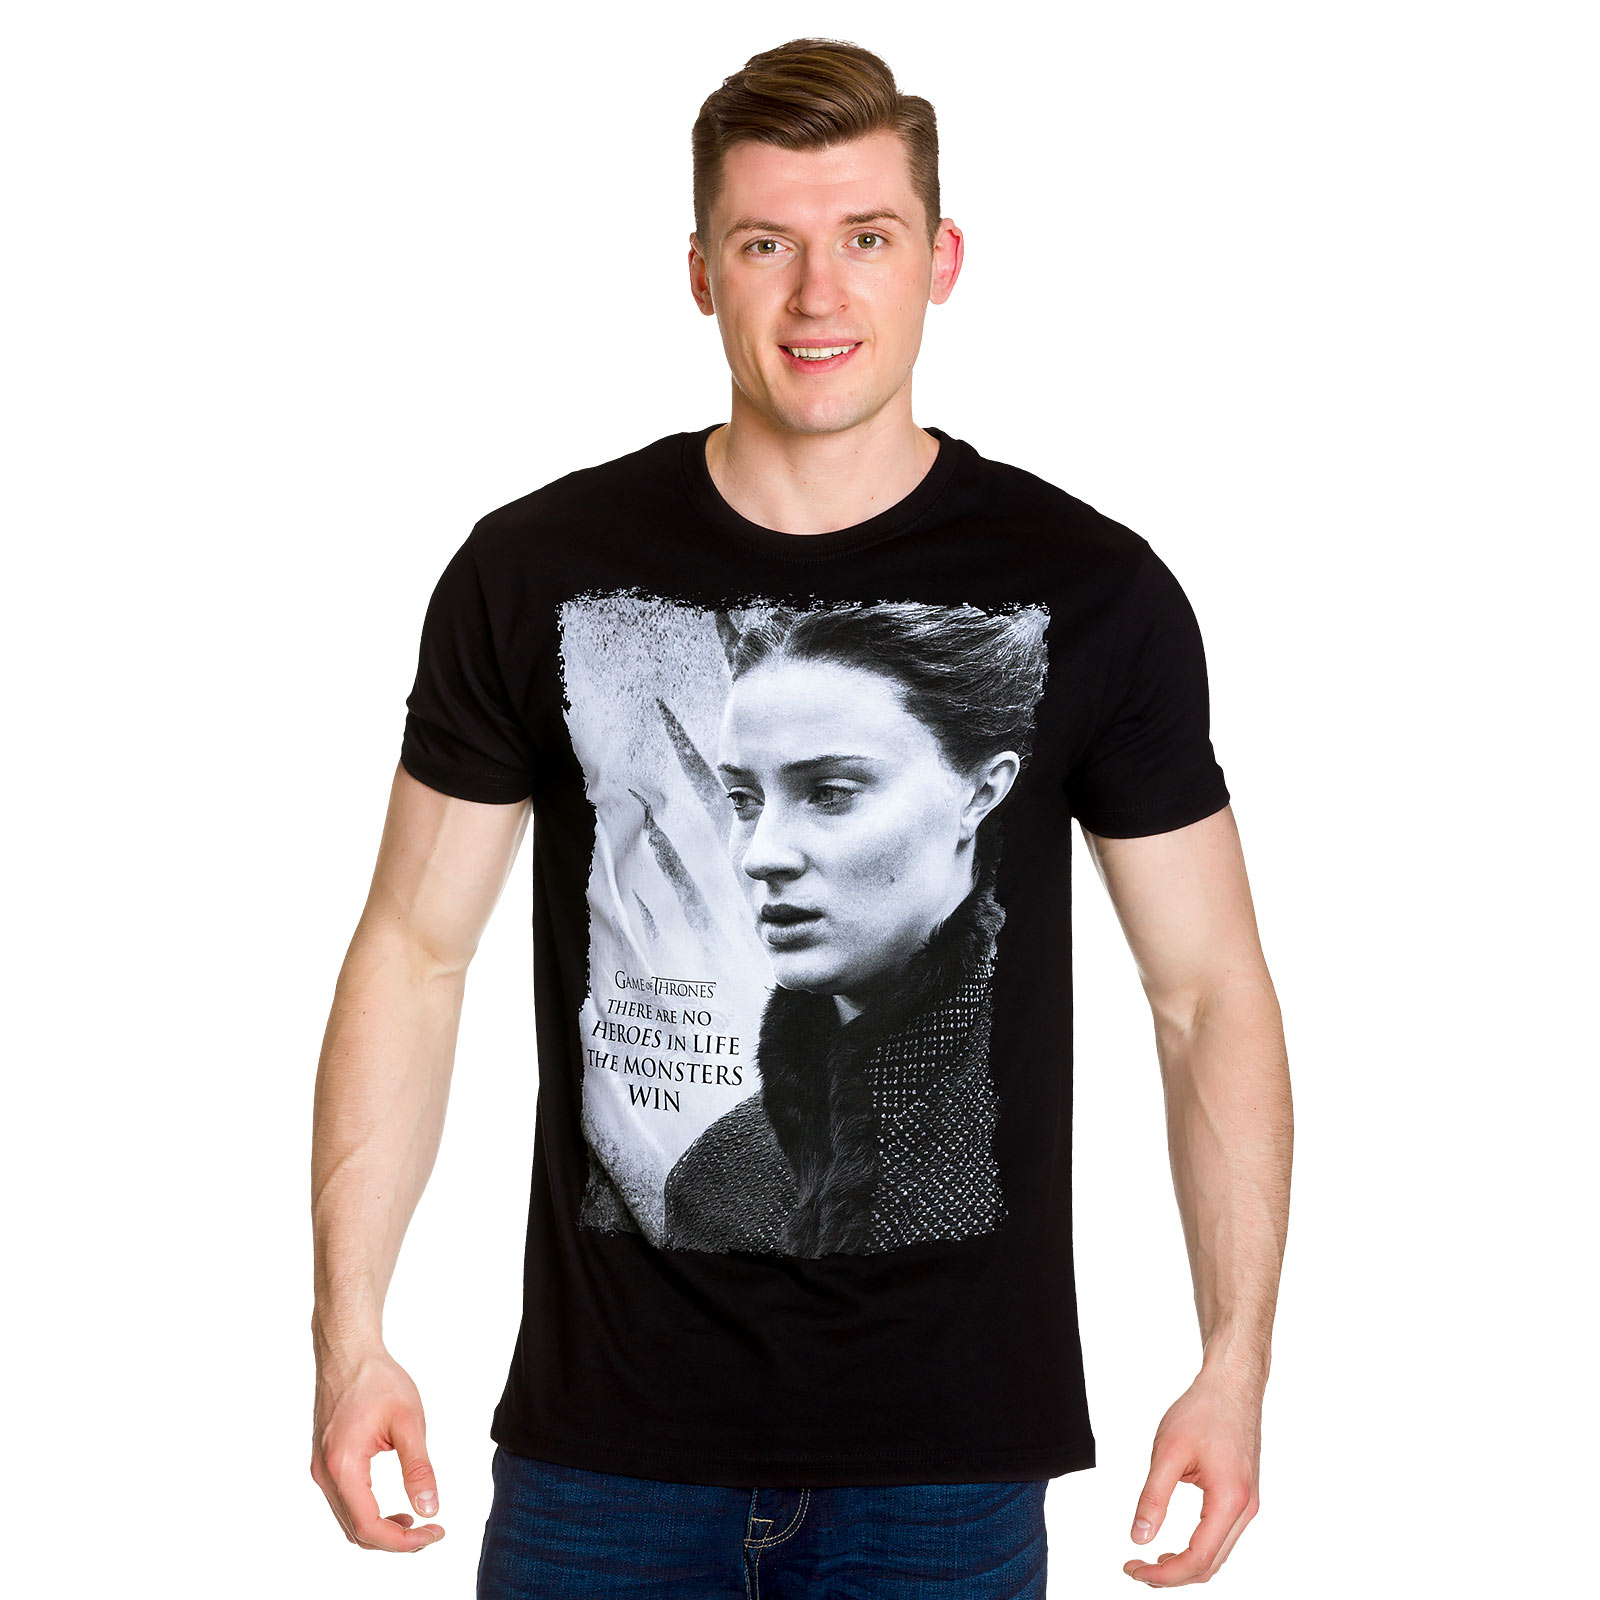 Game of Thrones - Sansa The Monsters Win T-Shirt